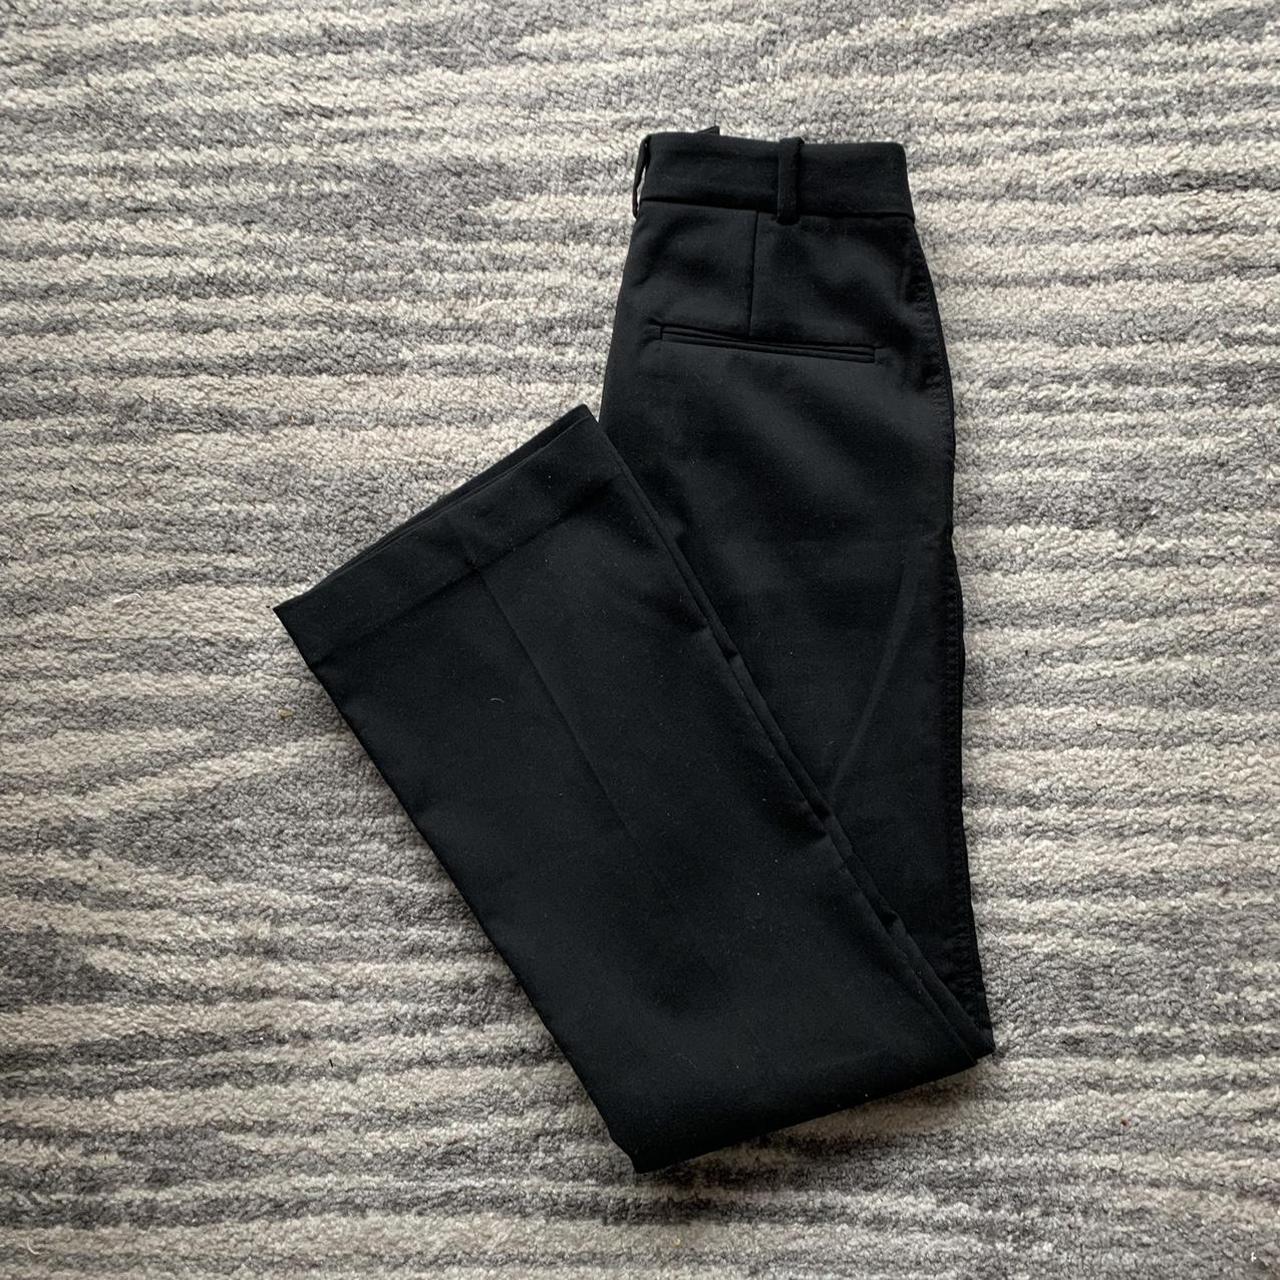 & Other Stories Women's Black Trousers | Depop